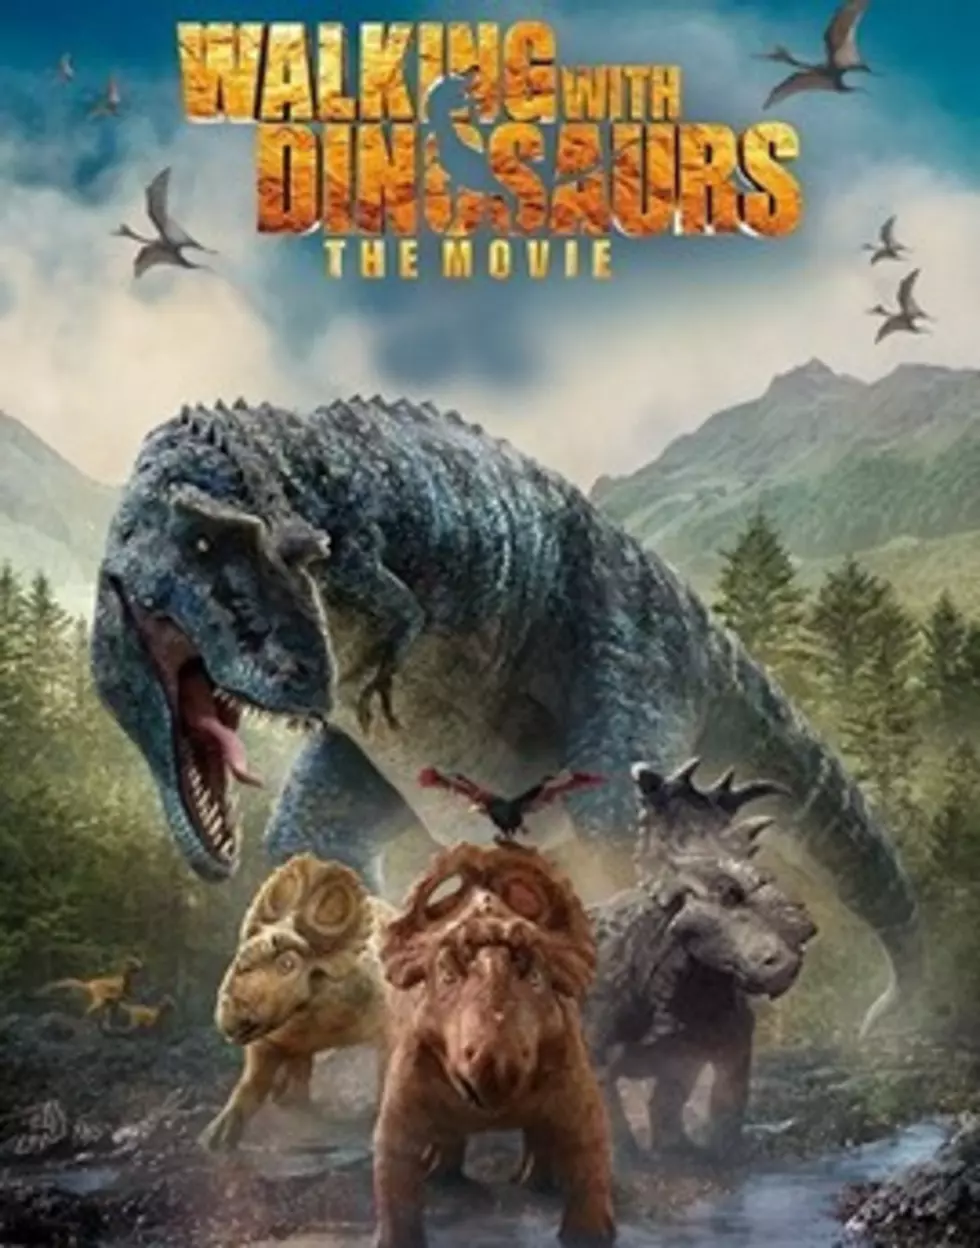 Go See The Movie “Walking With Dinosaurs” Wednesday and Thursday for $1